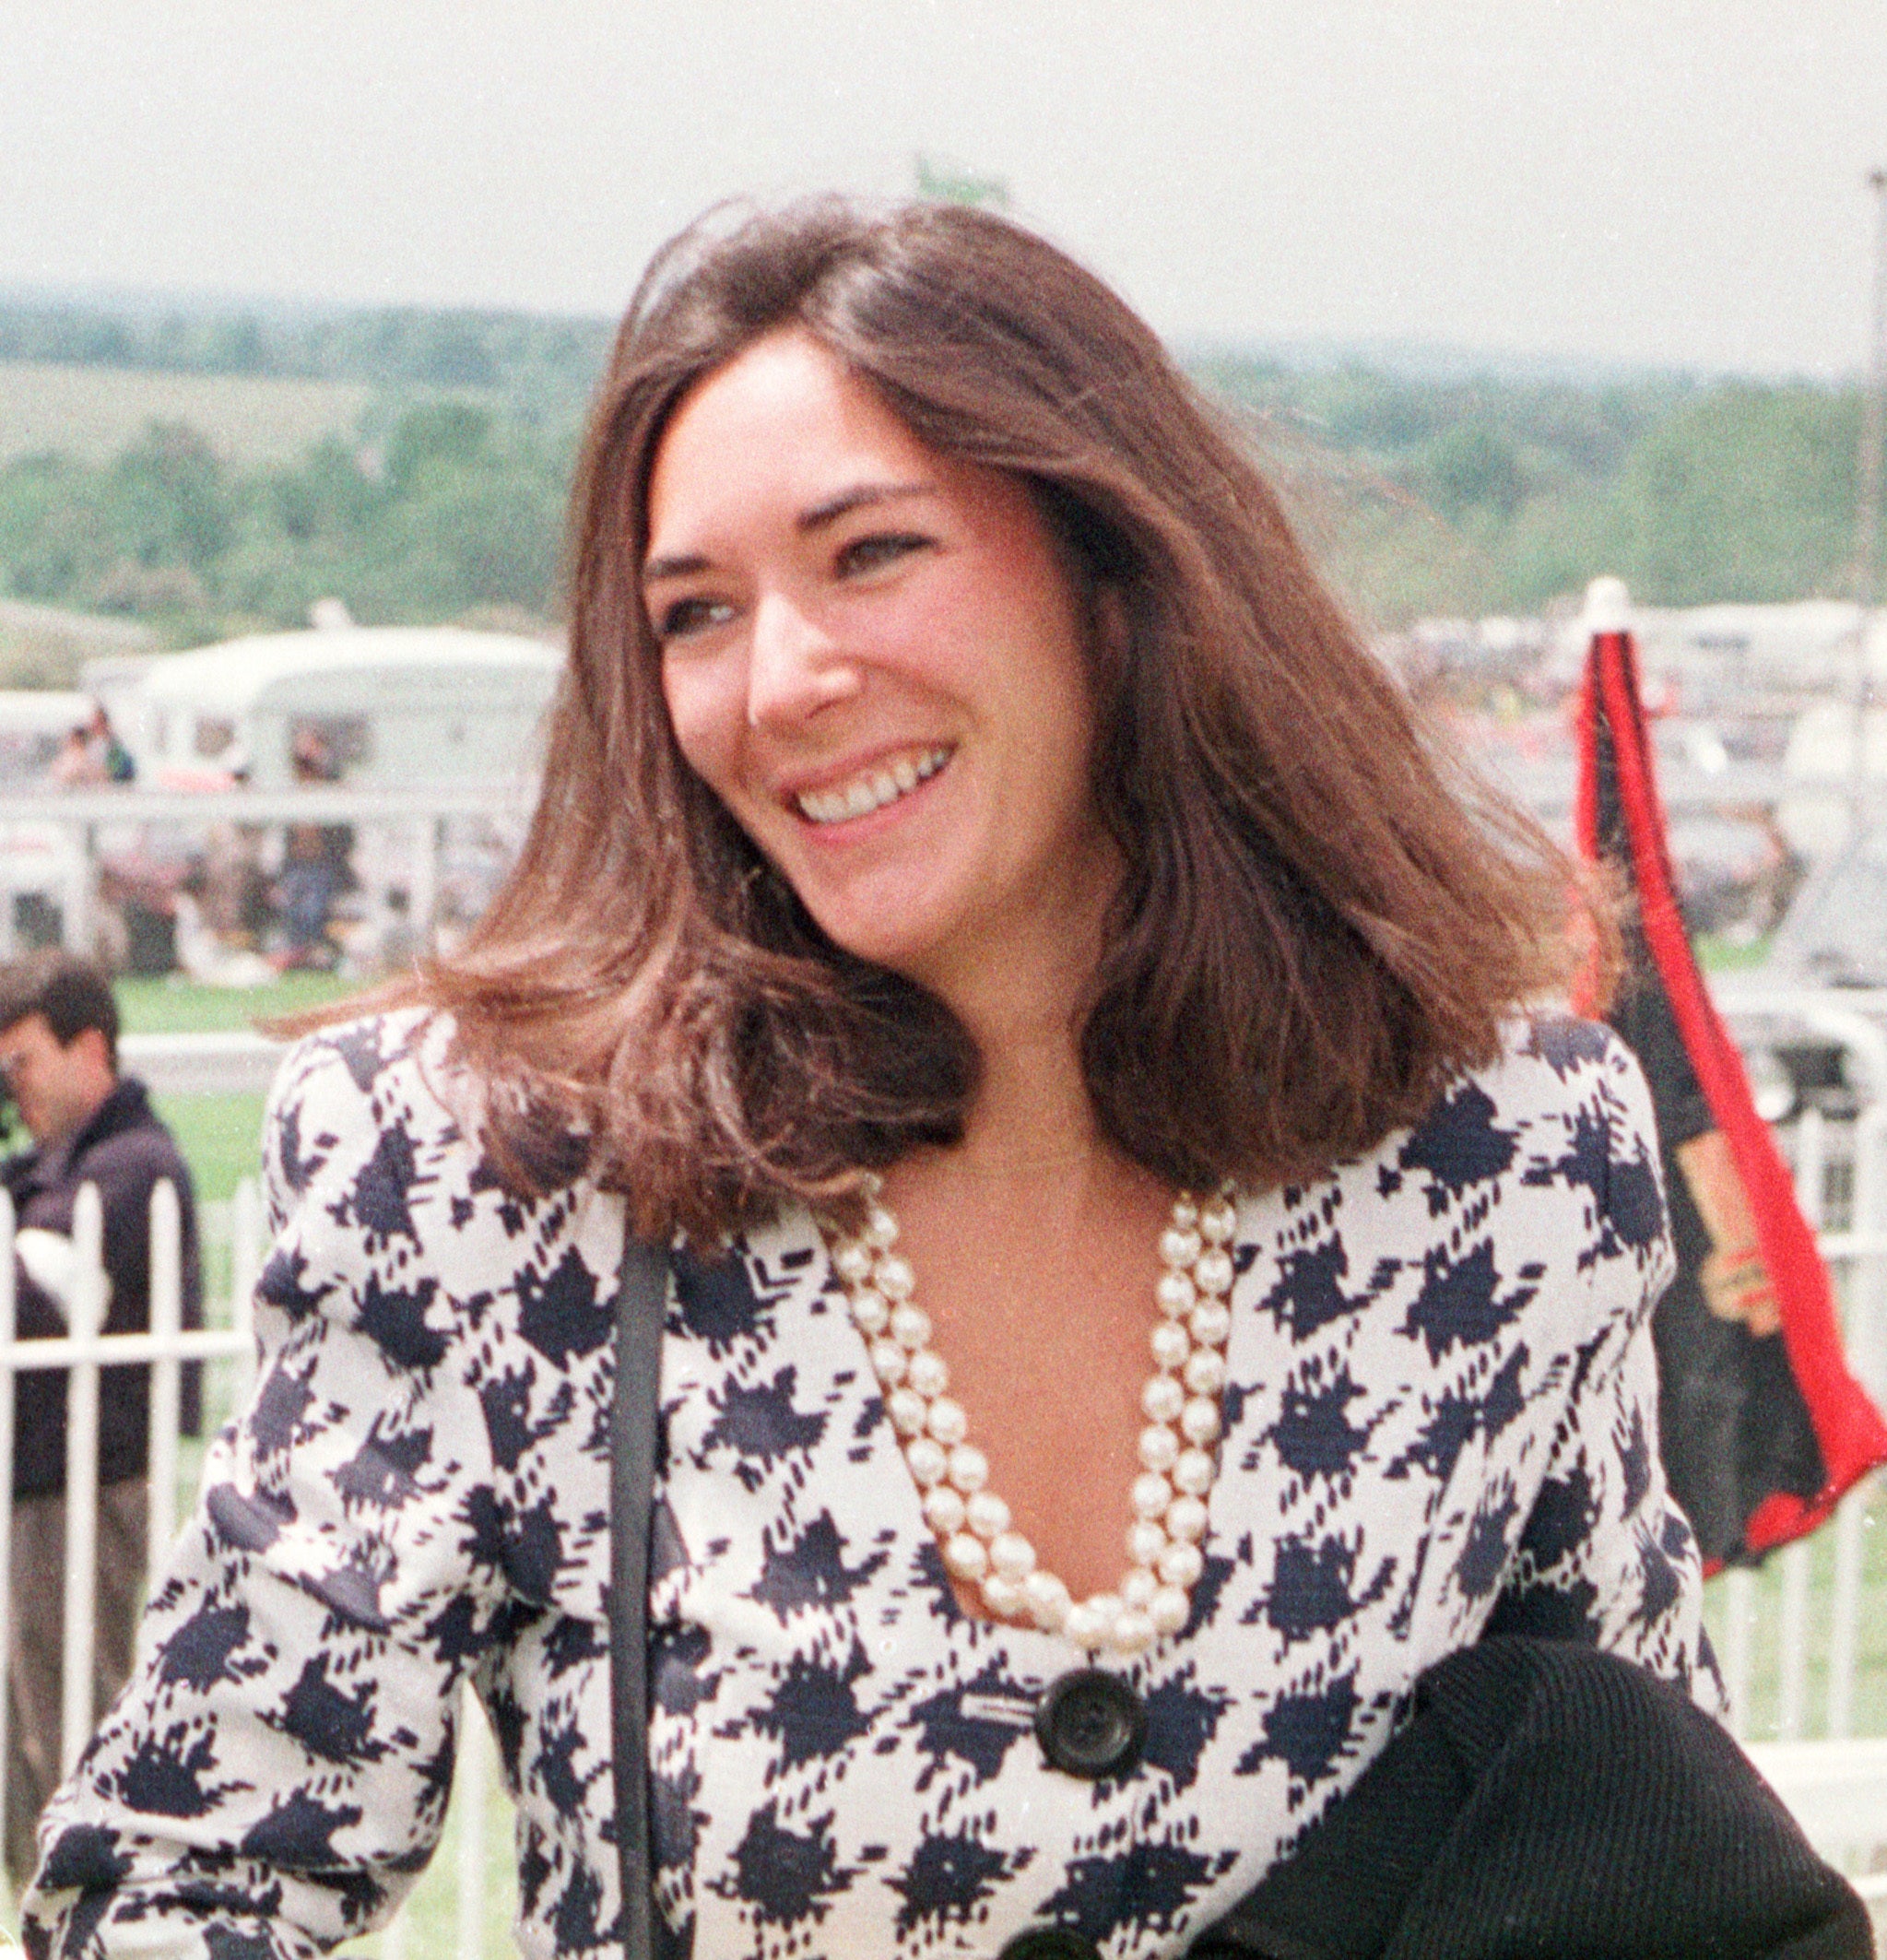 Ghislaine Maxwell pictured at Epsom Racecourse